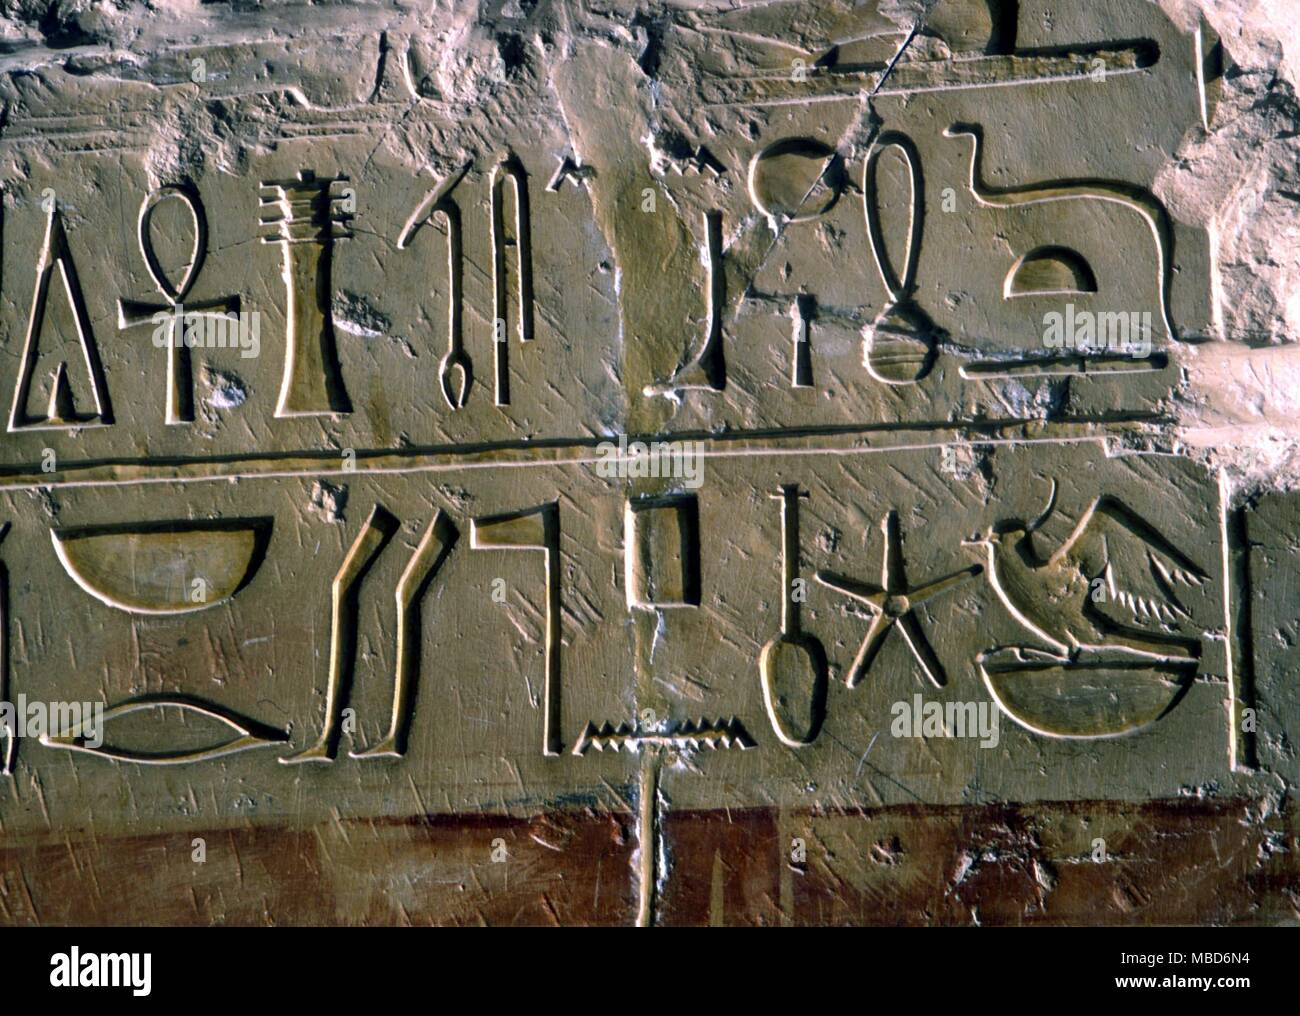 EGYPTIAN MYTHOLOGY - Alphabets - hieroglyphics - details of the sacred writing on the wall of the funerary temple of Hapshepsut, Thebes near Luxor Stock Photo